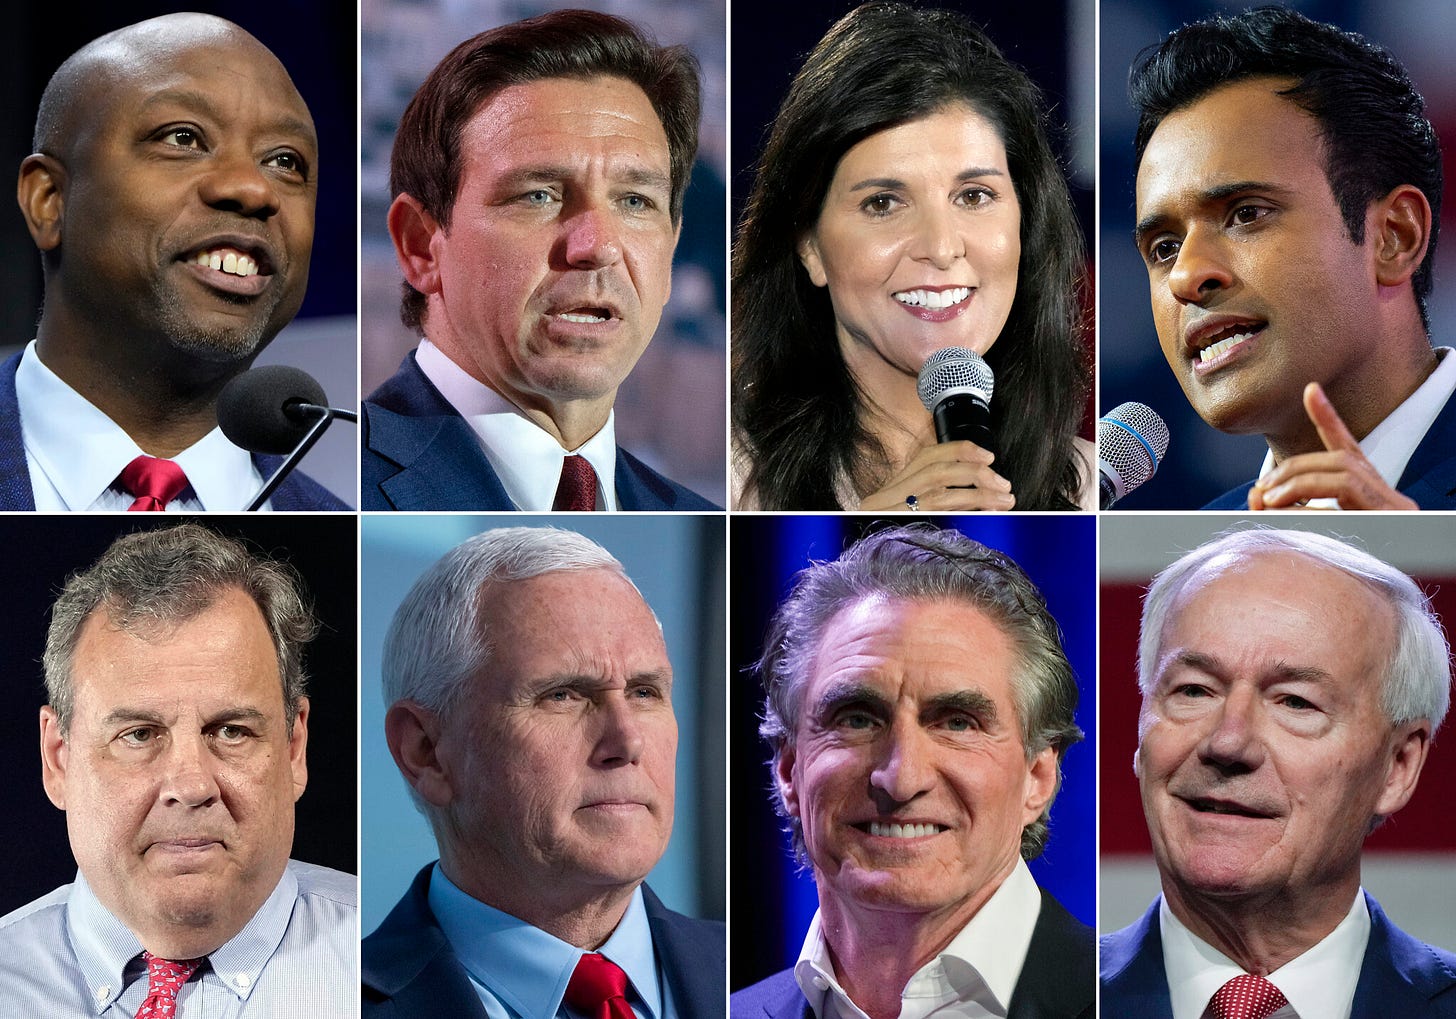 With Trump skipping Republican debate, other candidates seek advantage |  The Times of Israel